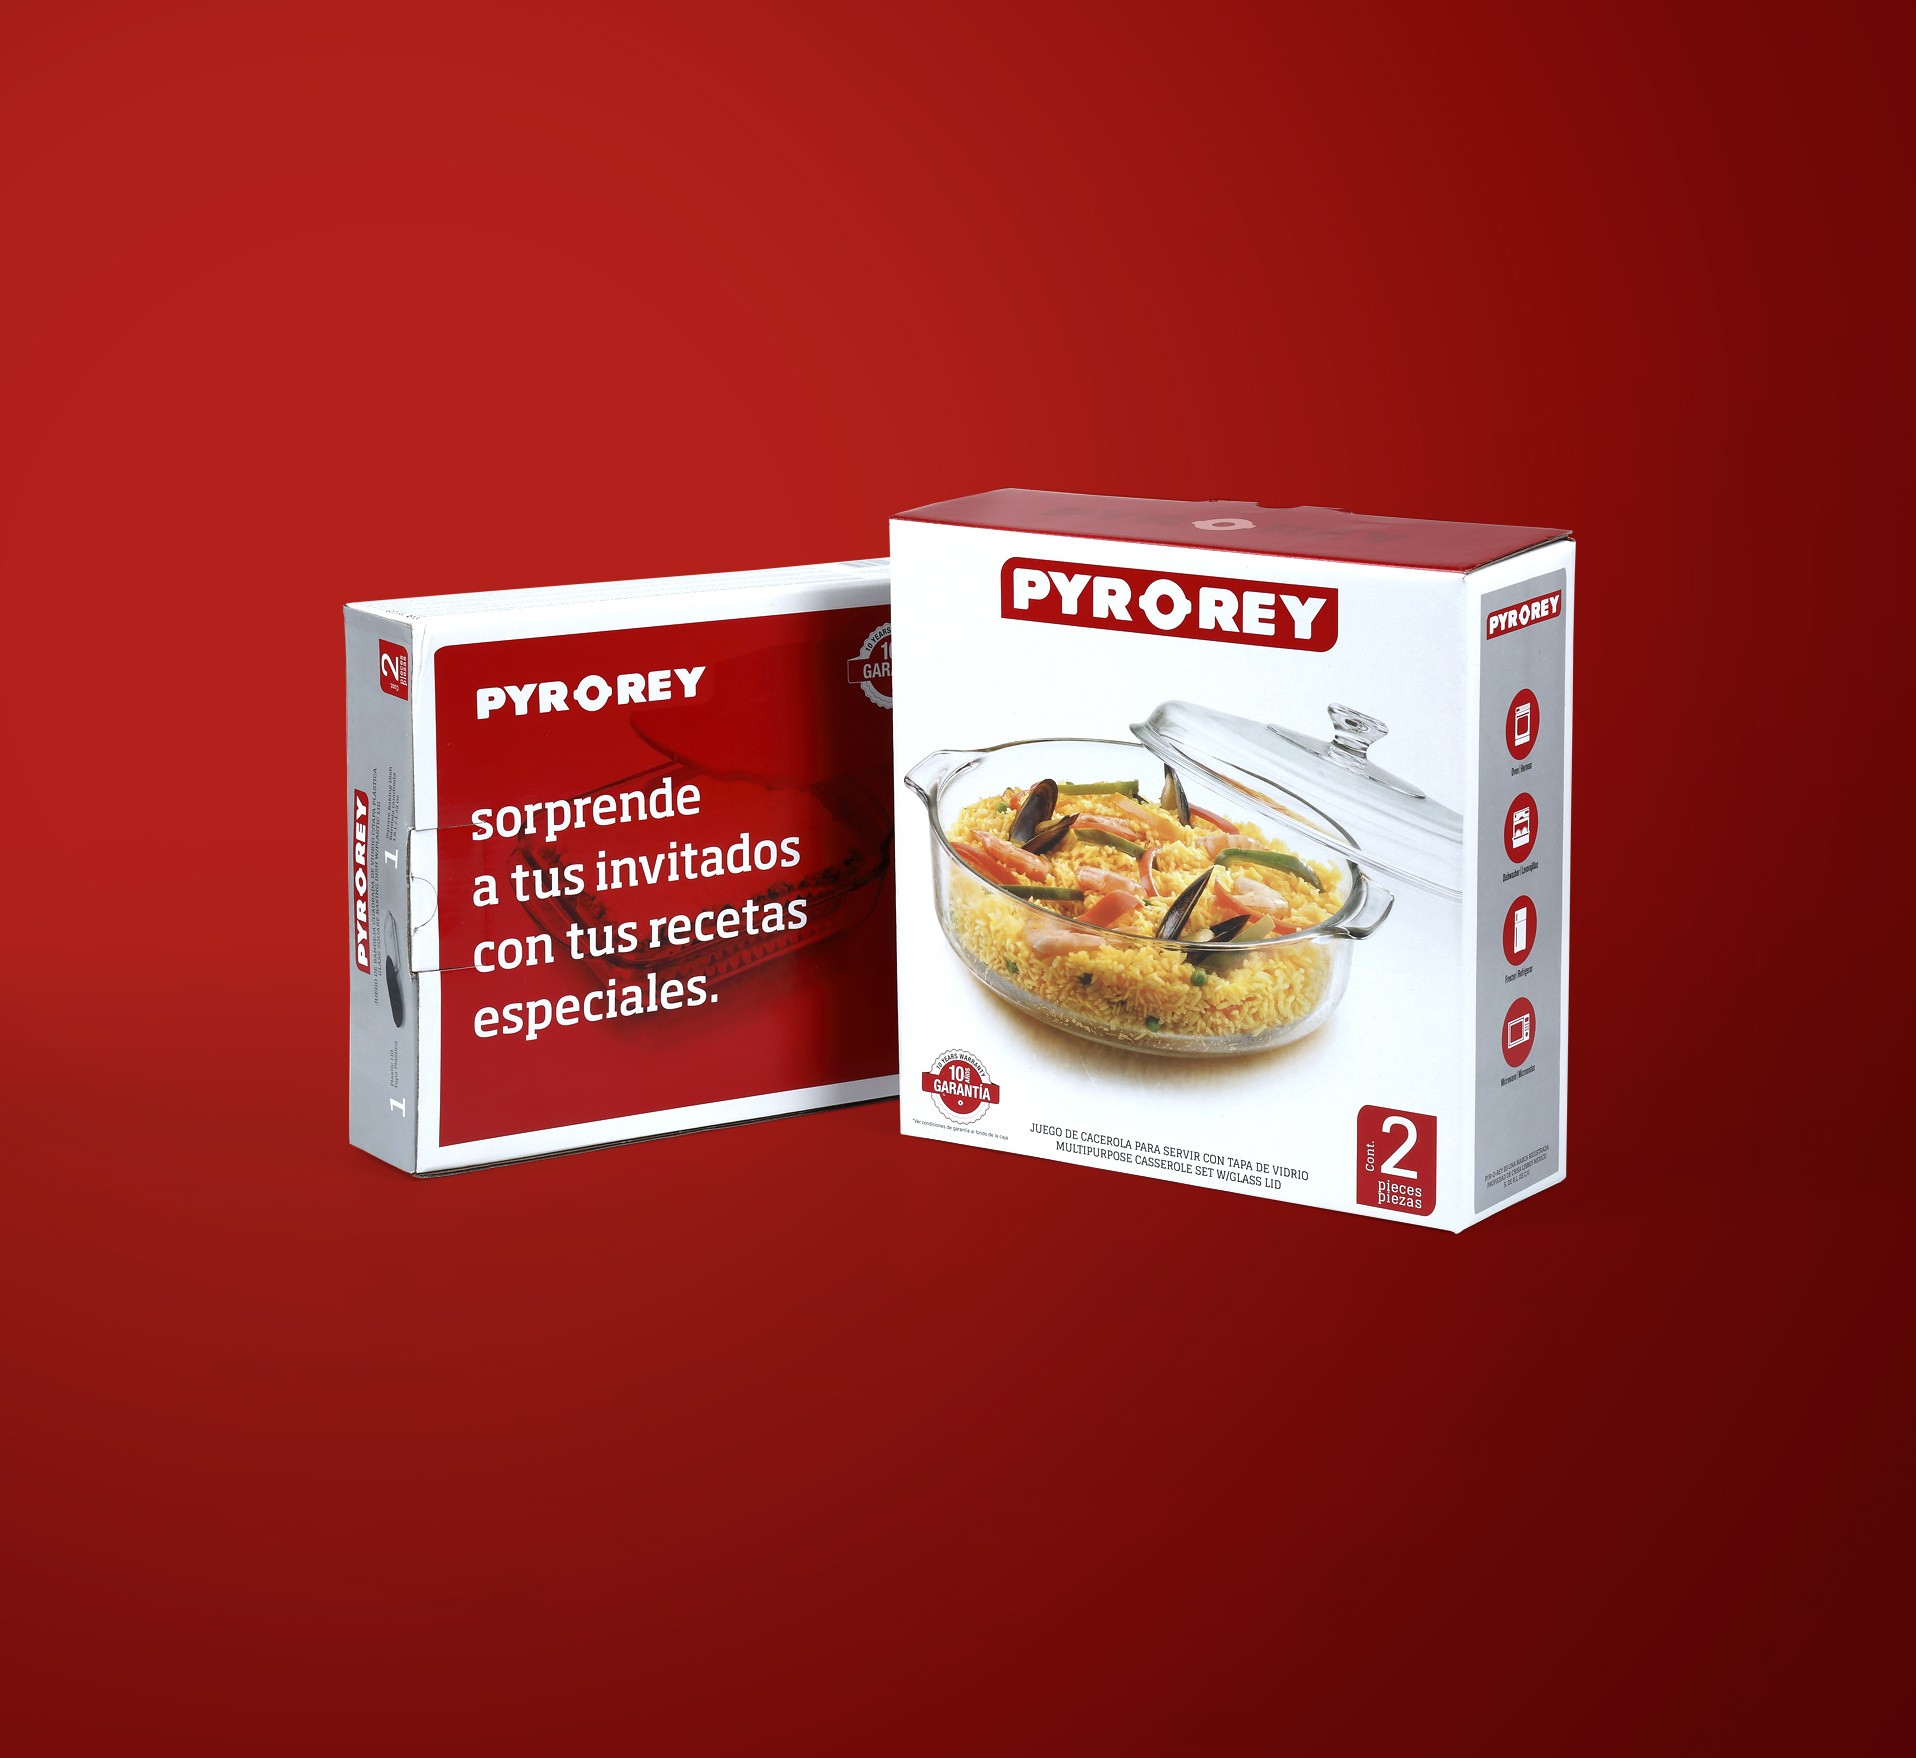 Mexican Pyr-o-rey Brand gets Packaging Redesign Concept